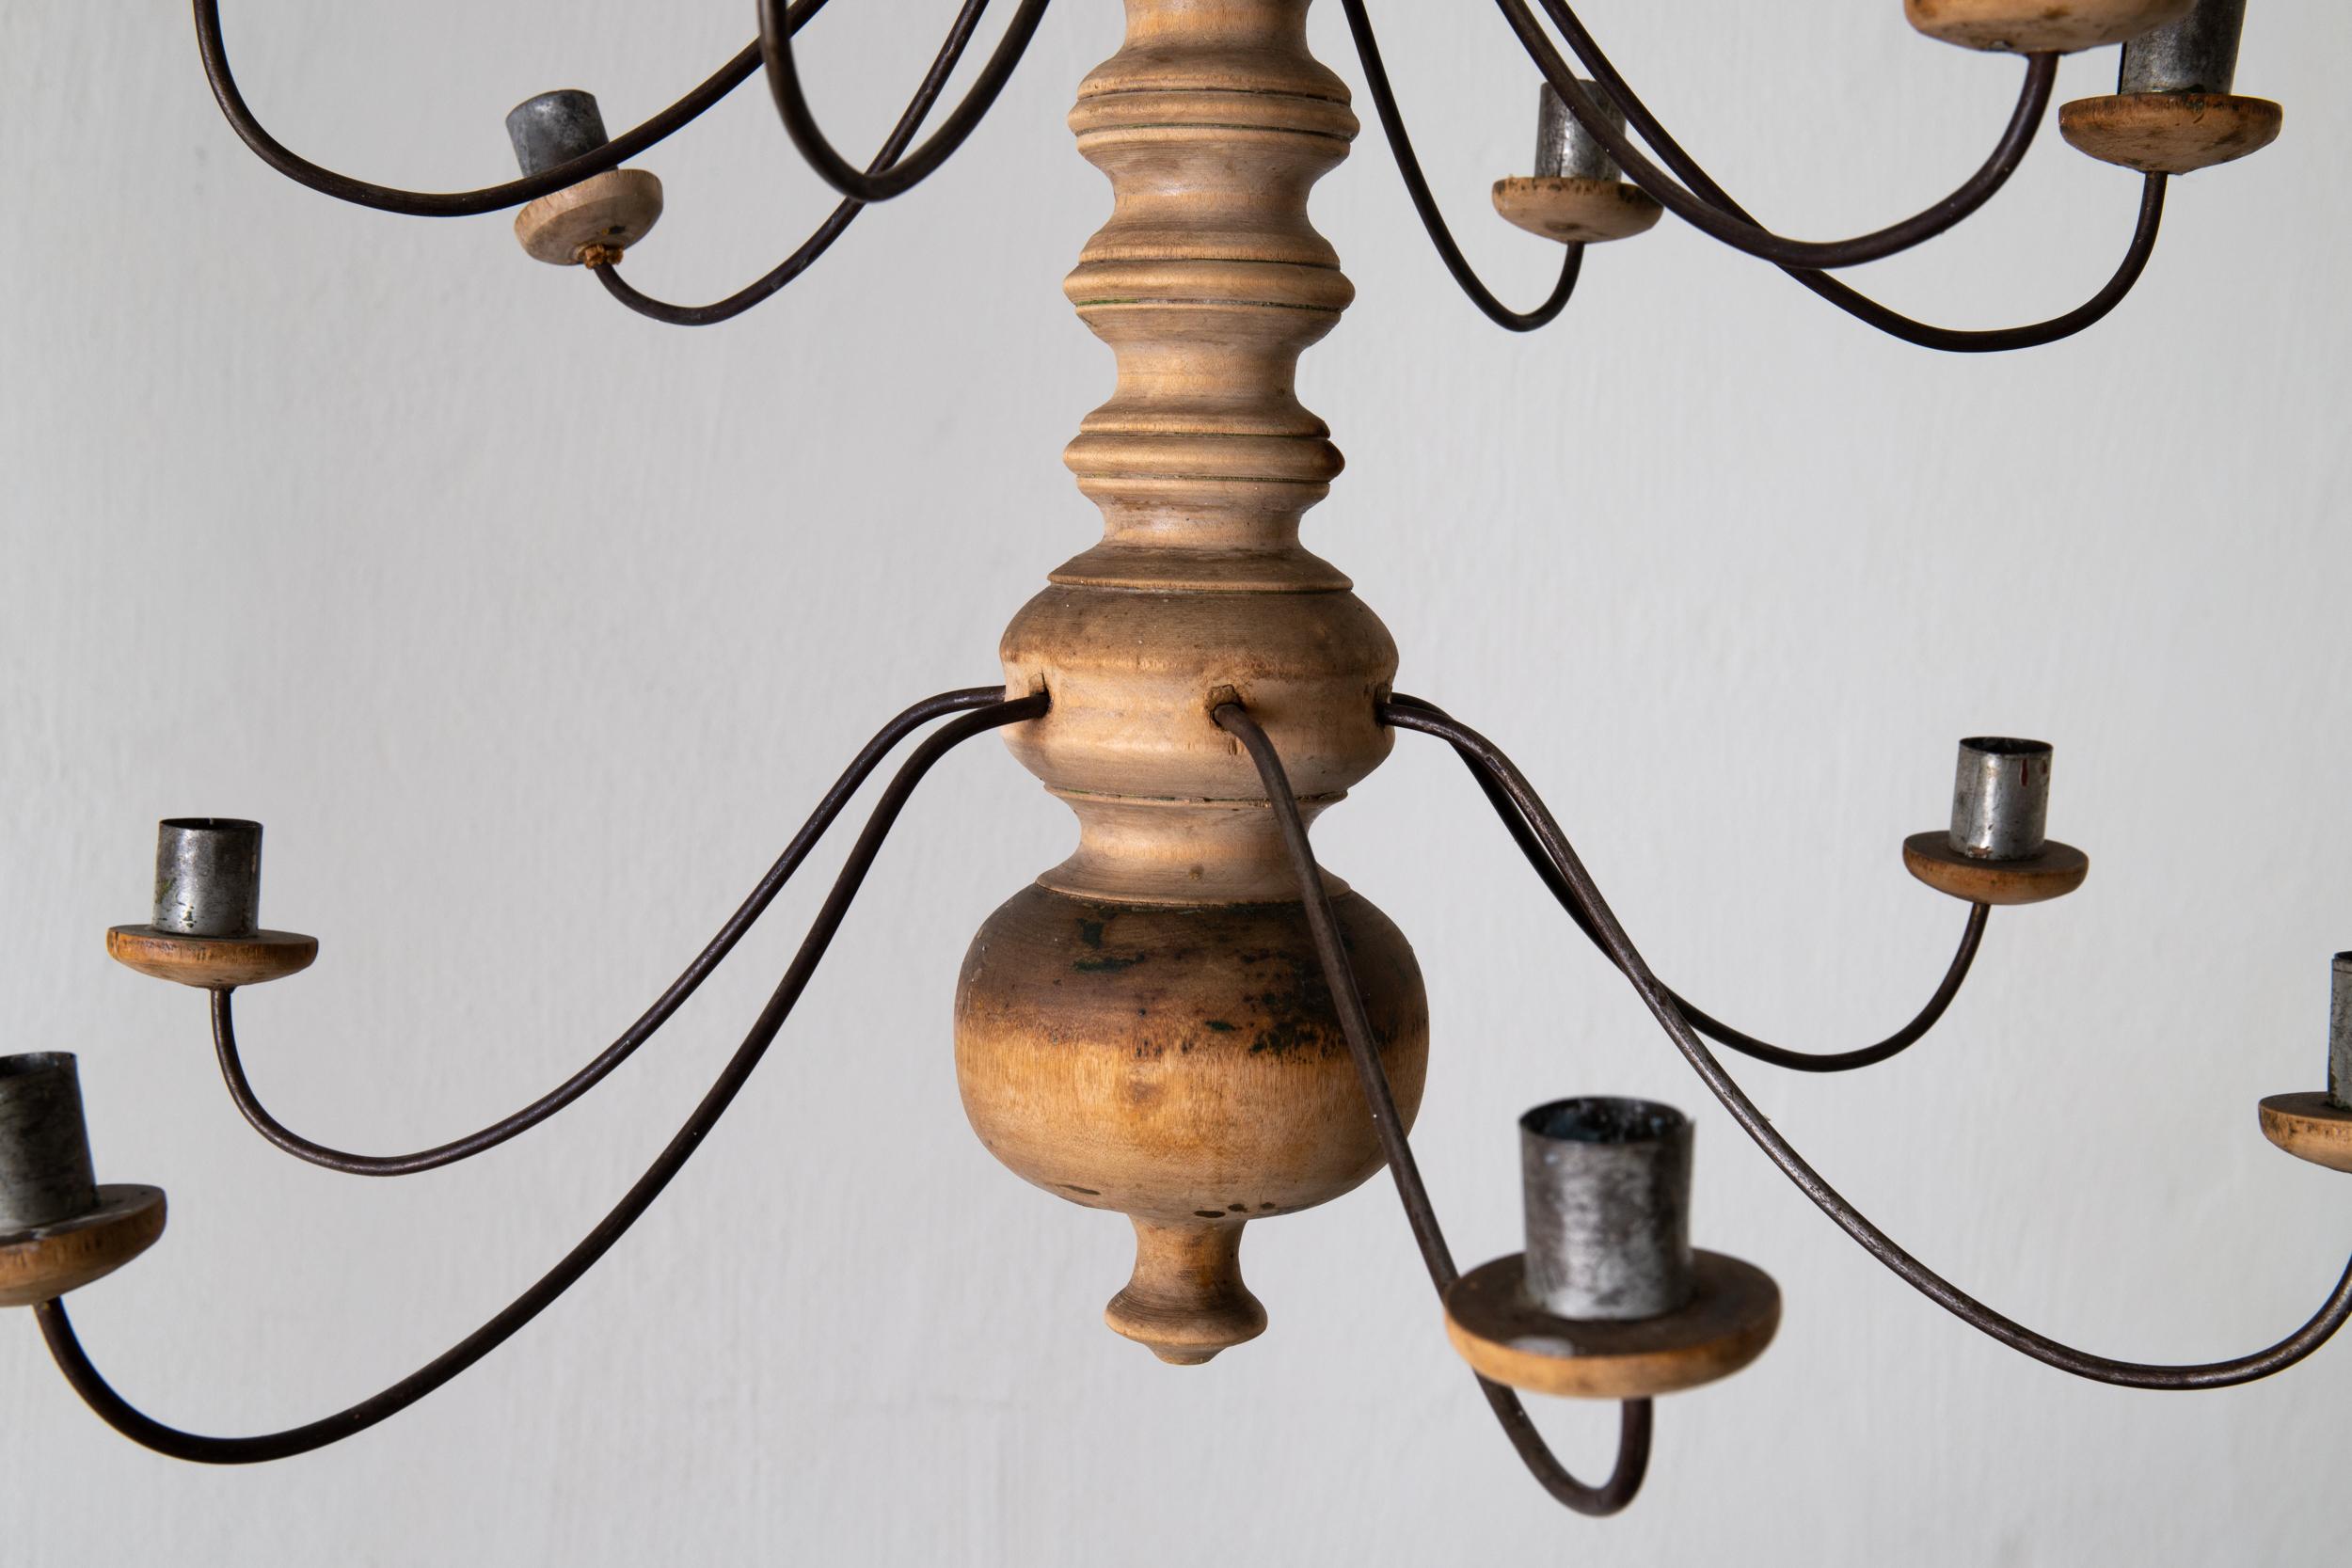 Chandelier wood rustic Swedish 18th century, Sweden. A chandelier made in Sweden during the 18th century. Body in wood with candleholders in metal for 16 candles.